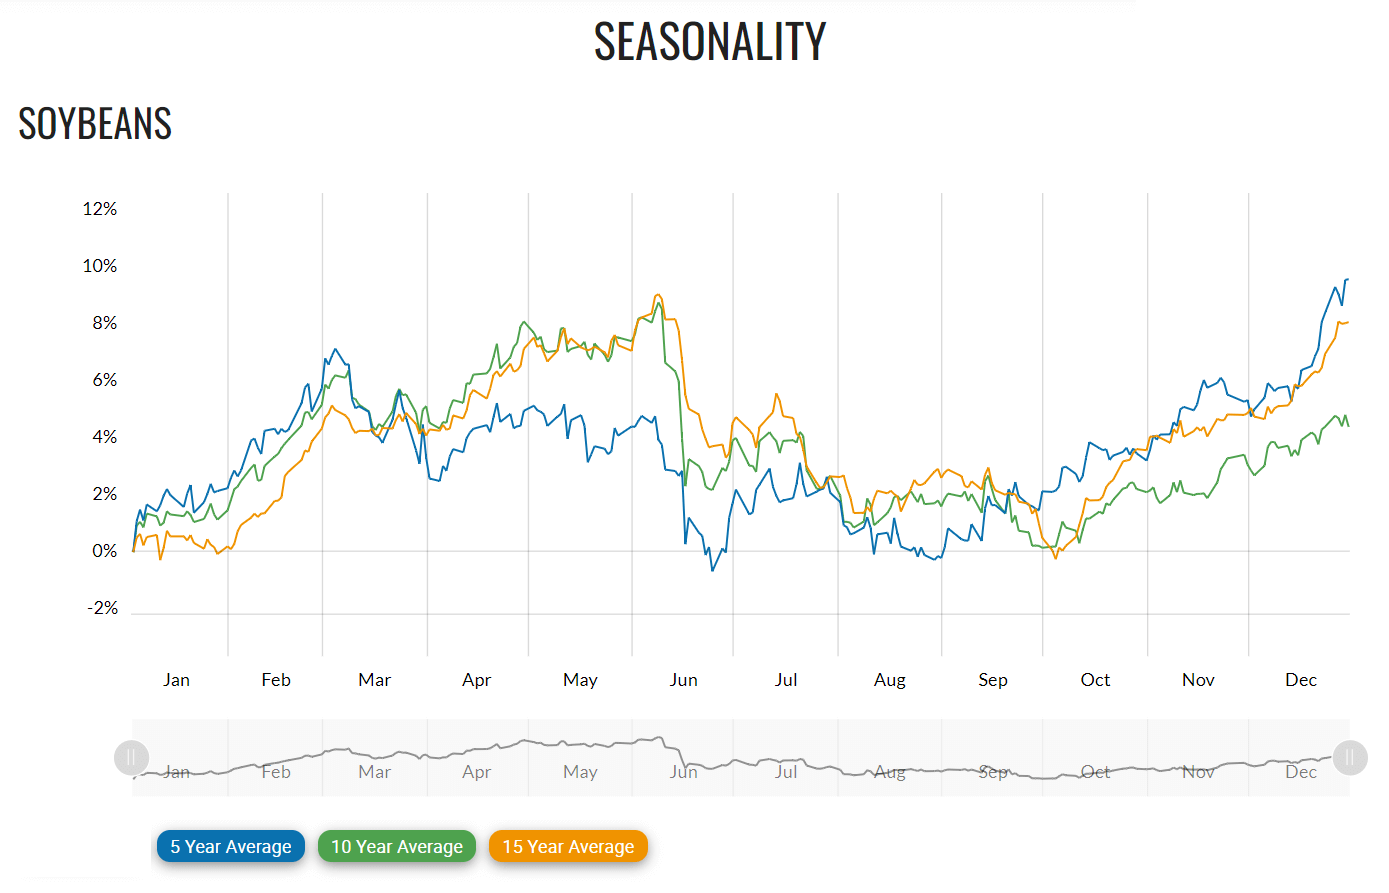 The seasonal price trend of soybeans in 5-, 10-, and 15-year averages Chart